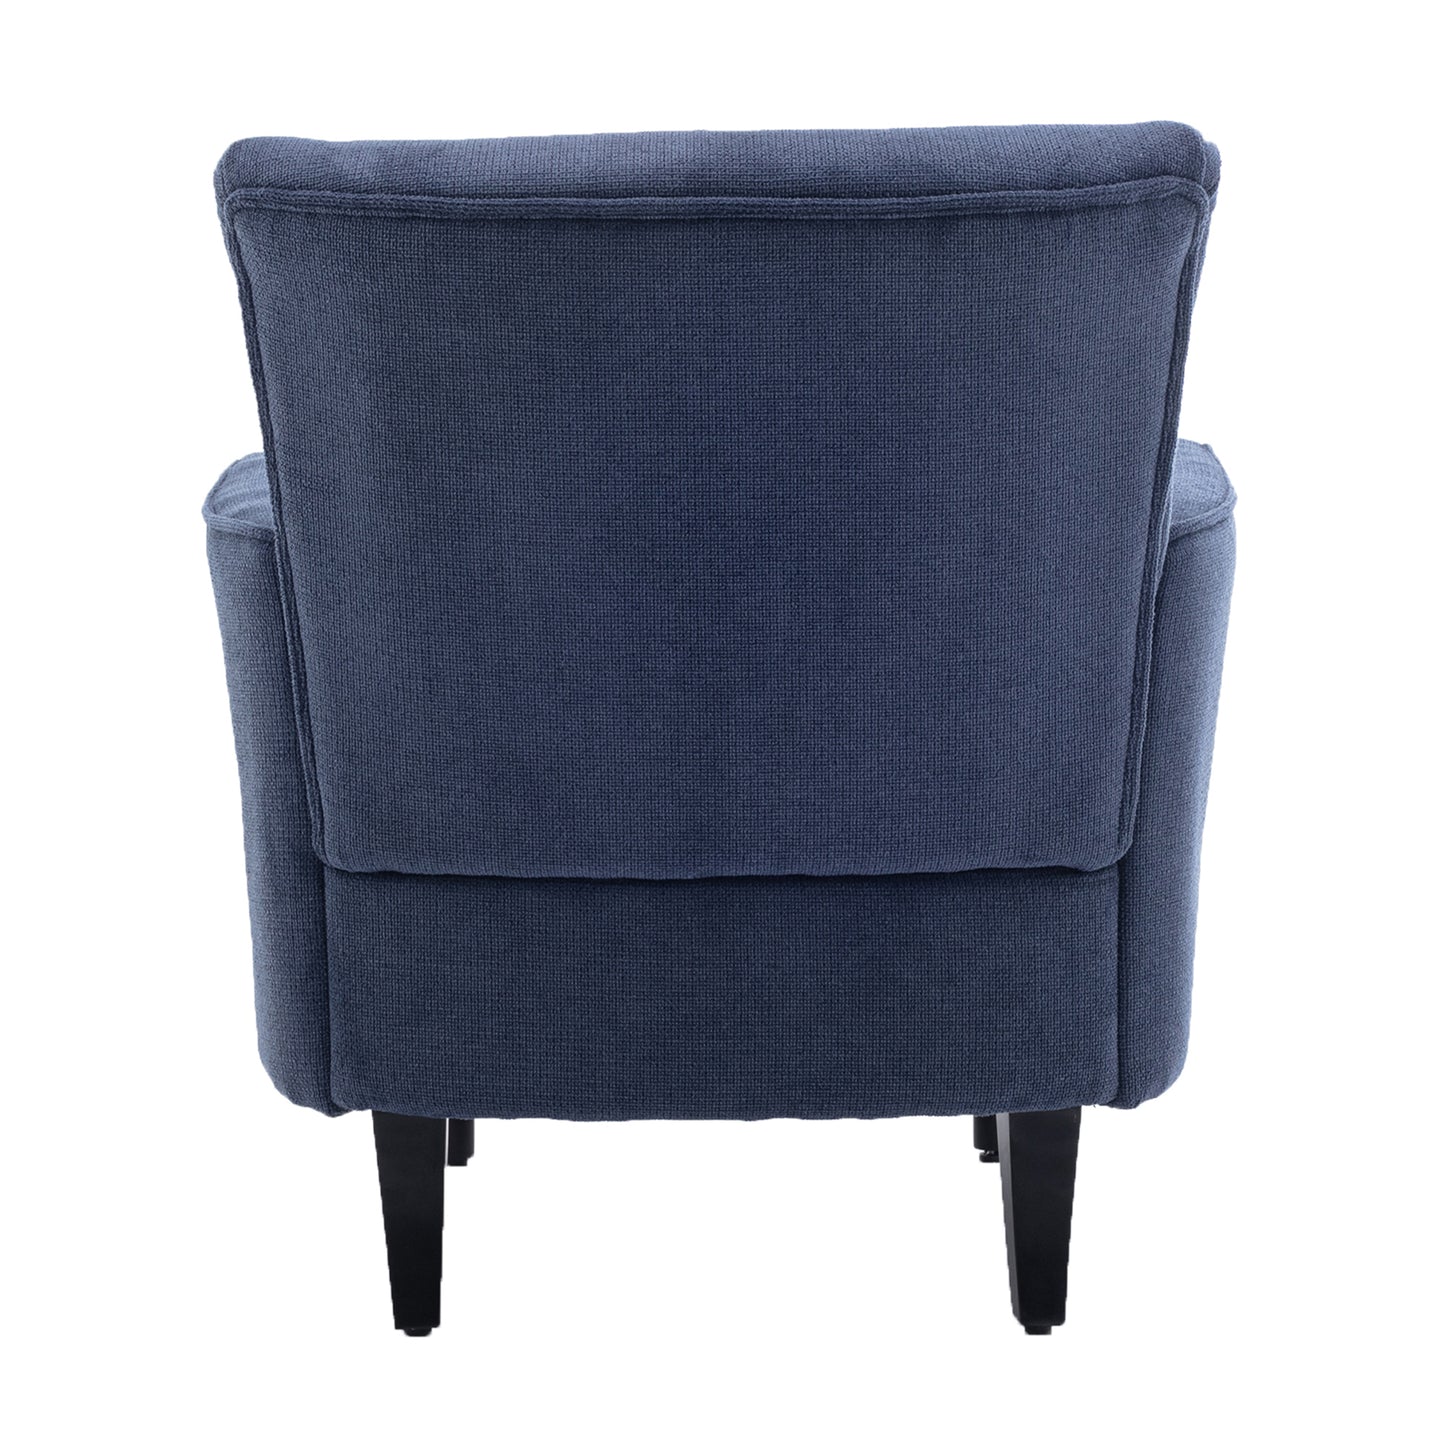 Armchair Modern Accent Sofa Chair with Linen surface,Leisure Chair with solid wood feet for living room bedroom Studio,Blue